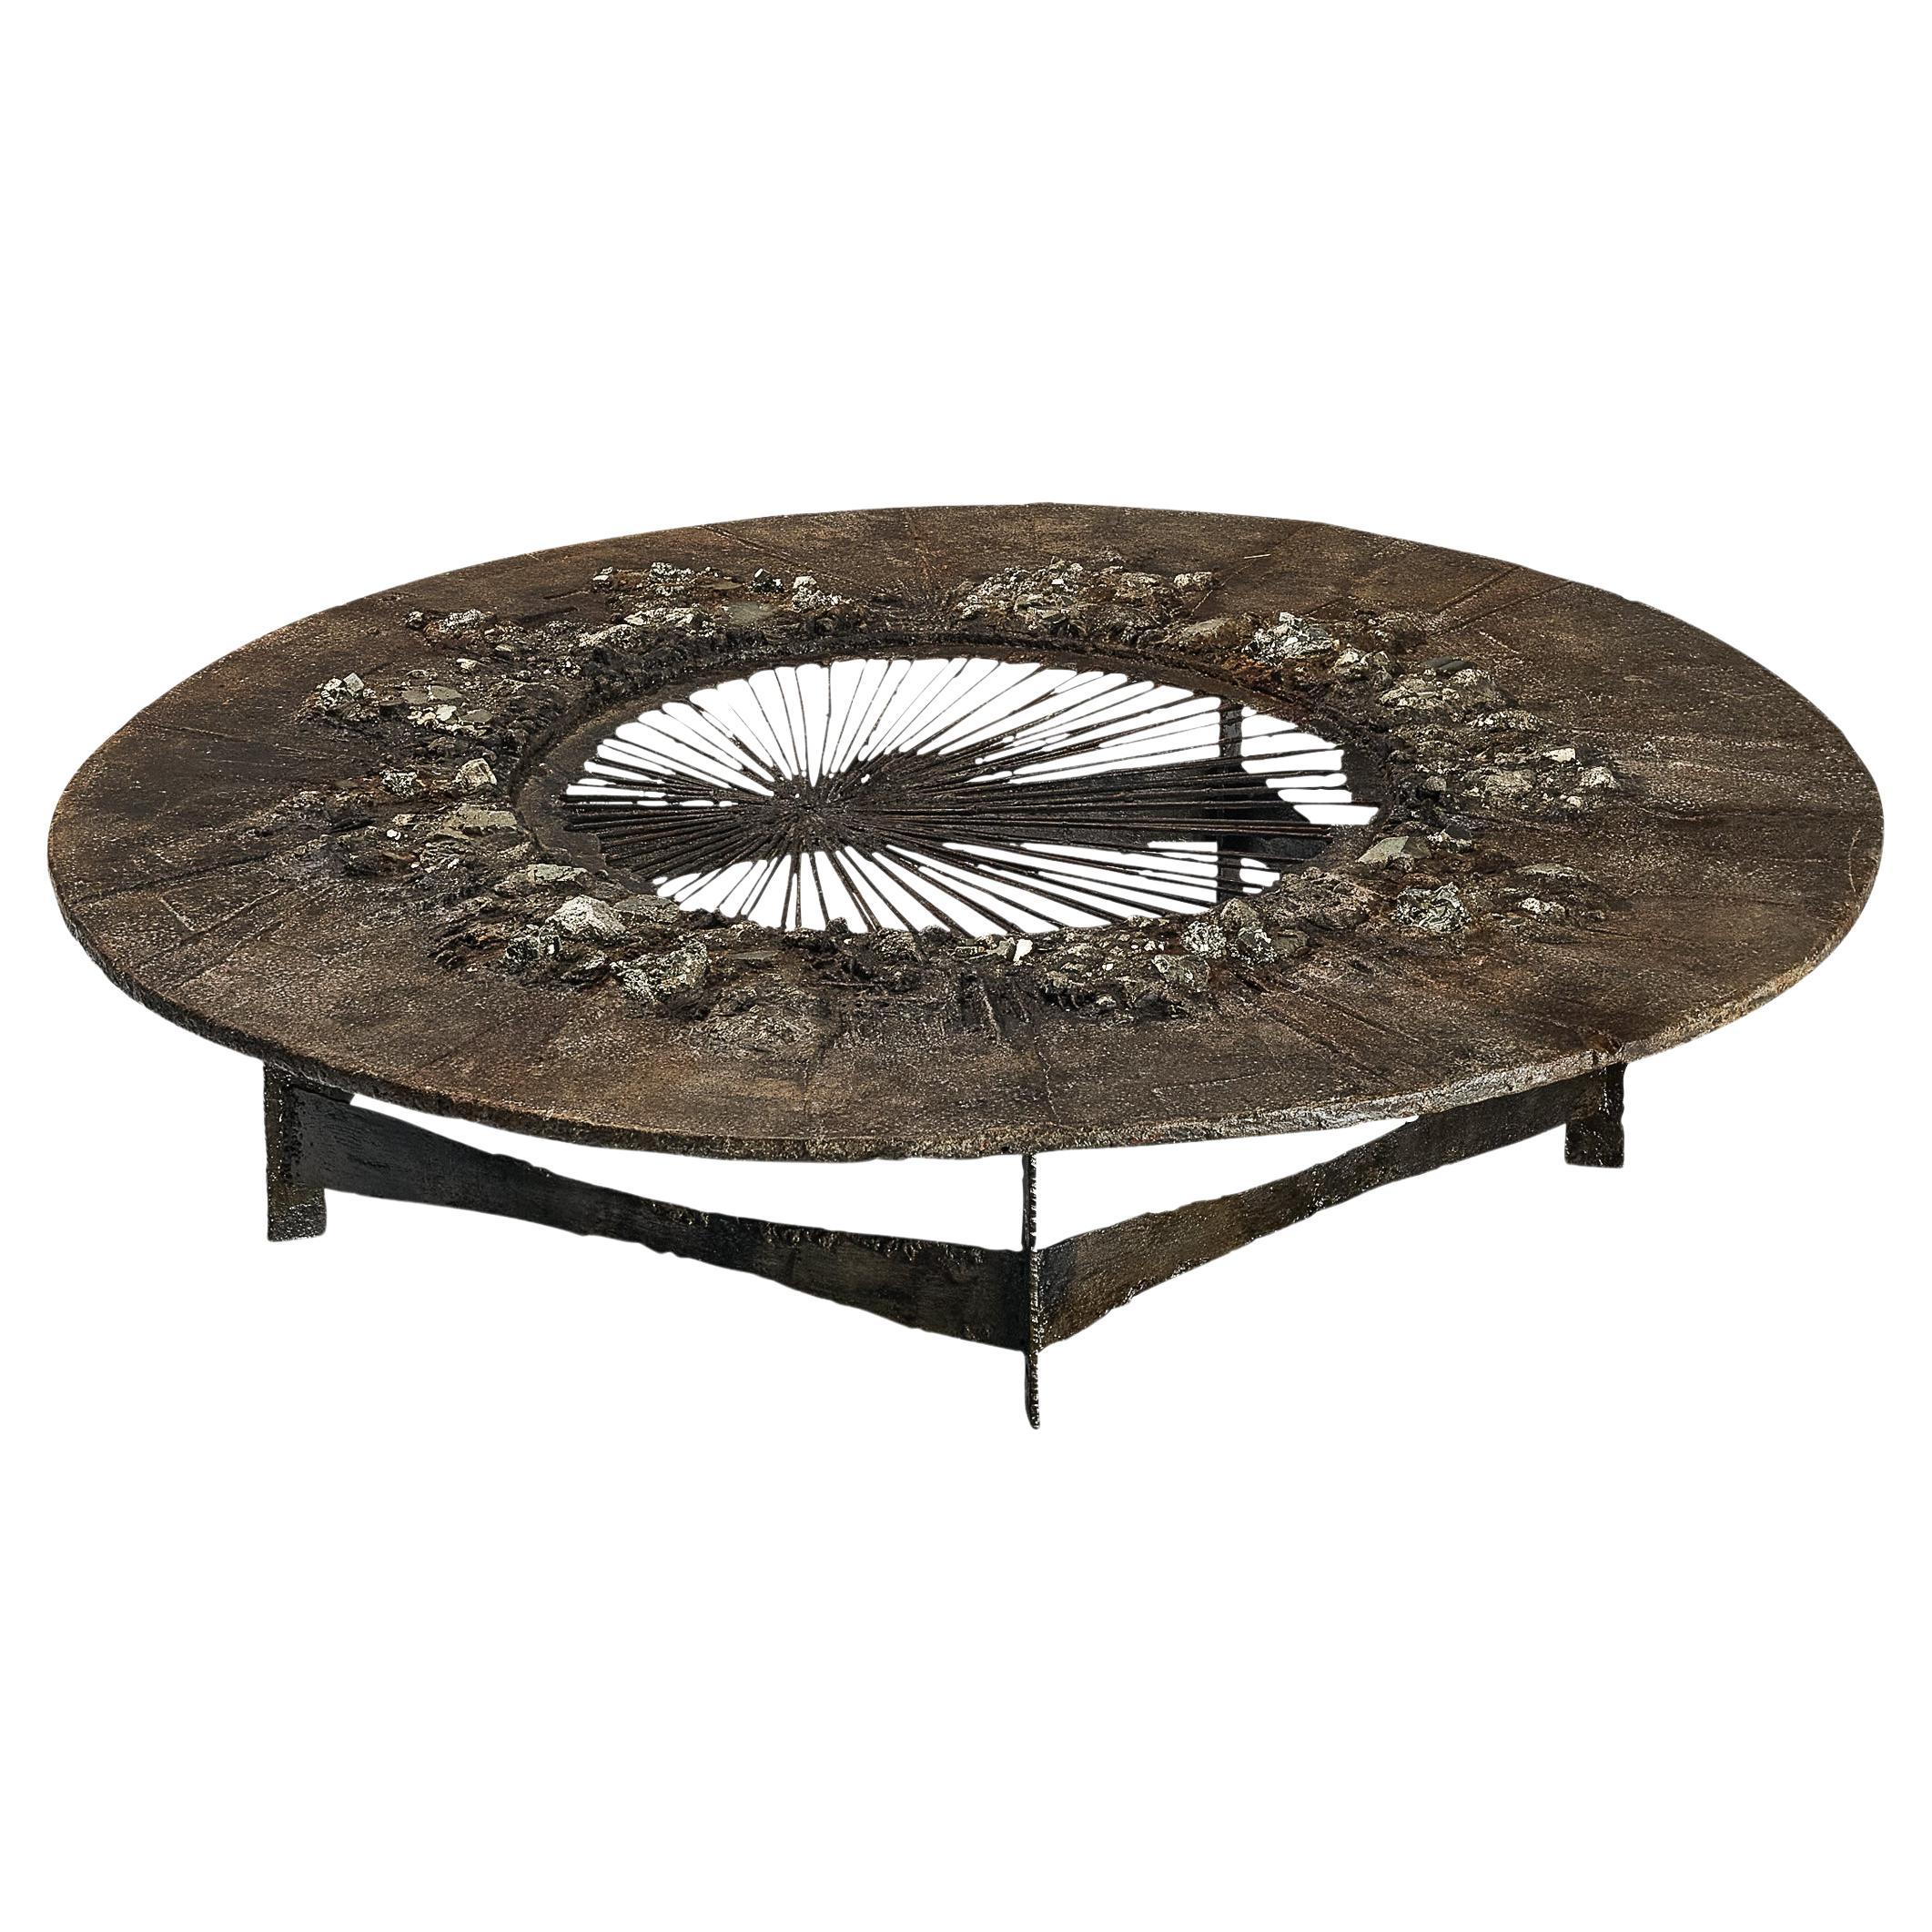 Unique Pia Manu Handcrafted Coffee Table in Pyrite and Ammonite 